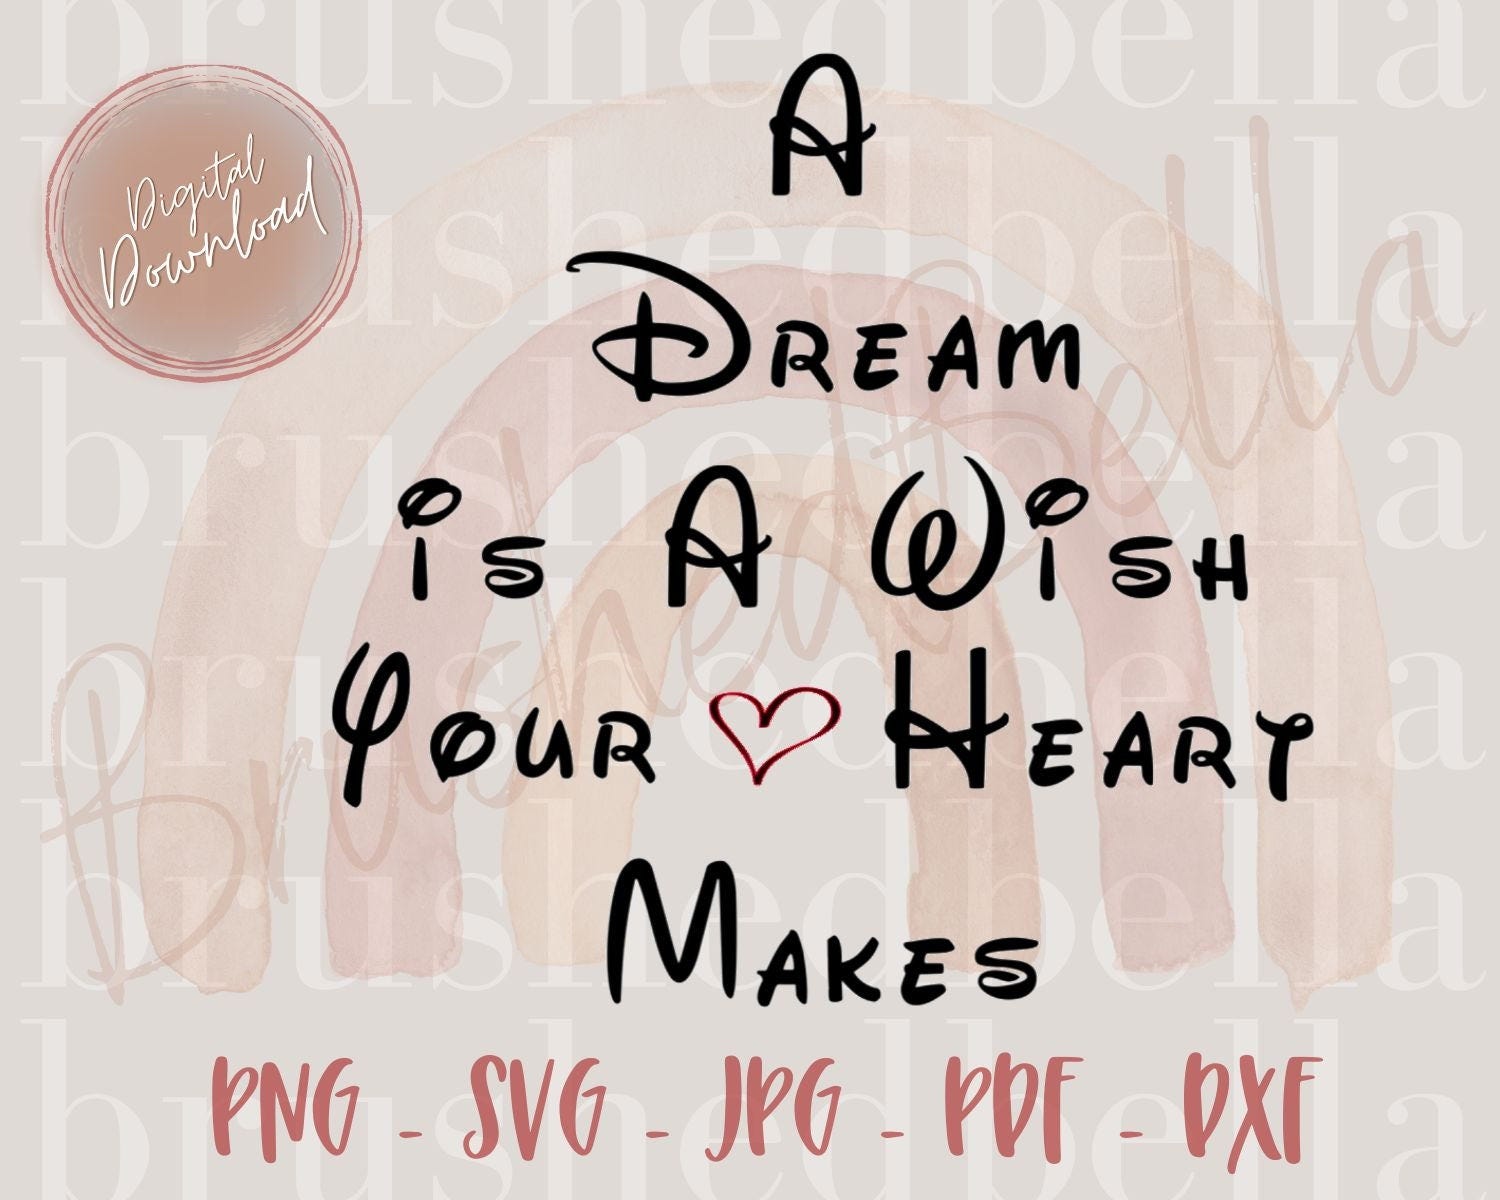 A dream is a wish your heart makes SVG Cut File Digital file Svg Dxf outlined for Silhouette Cricut